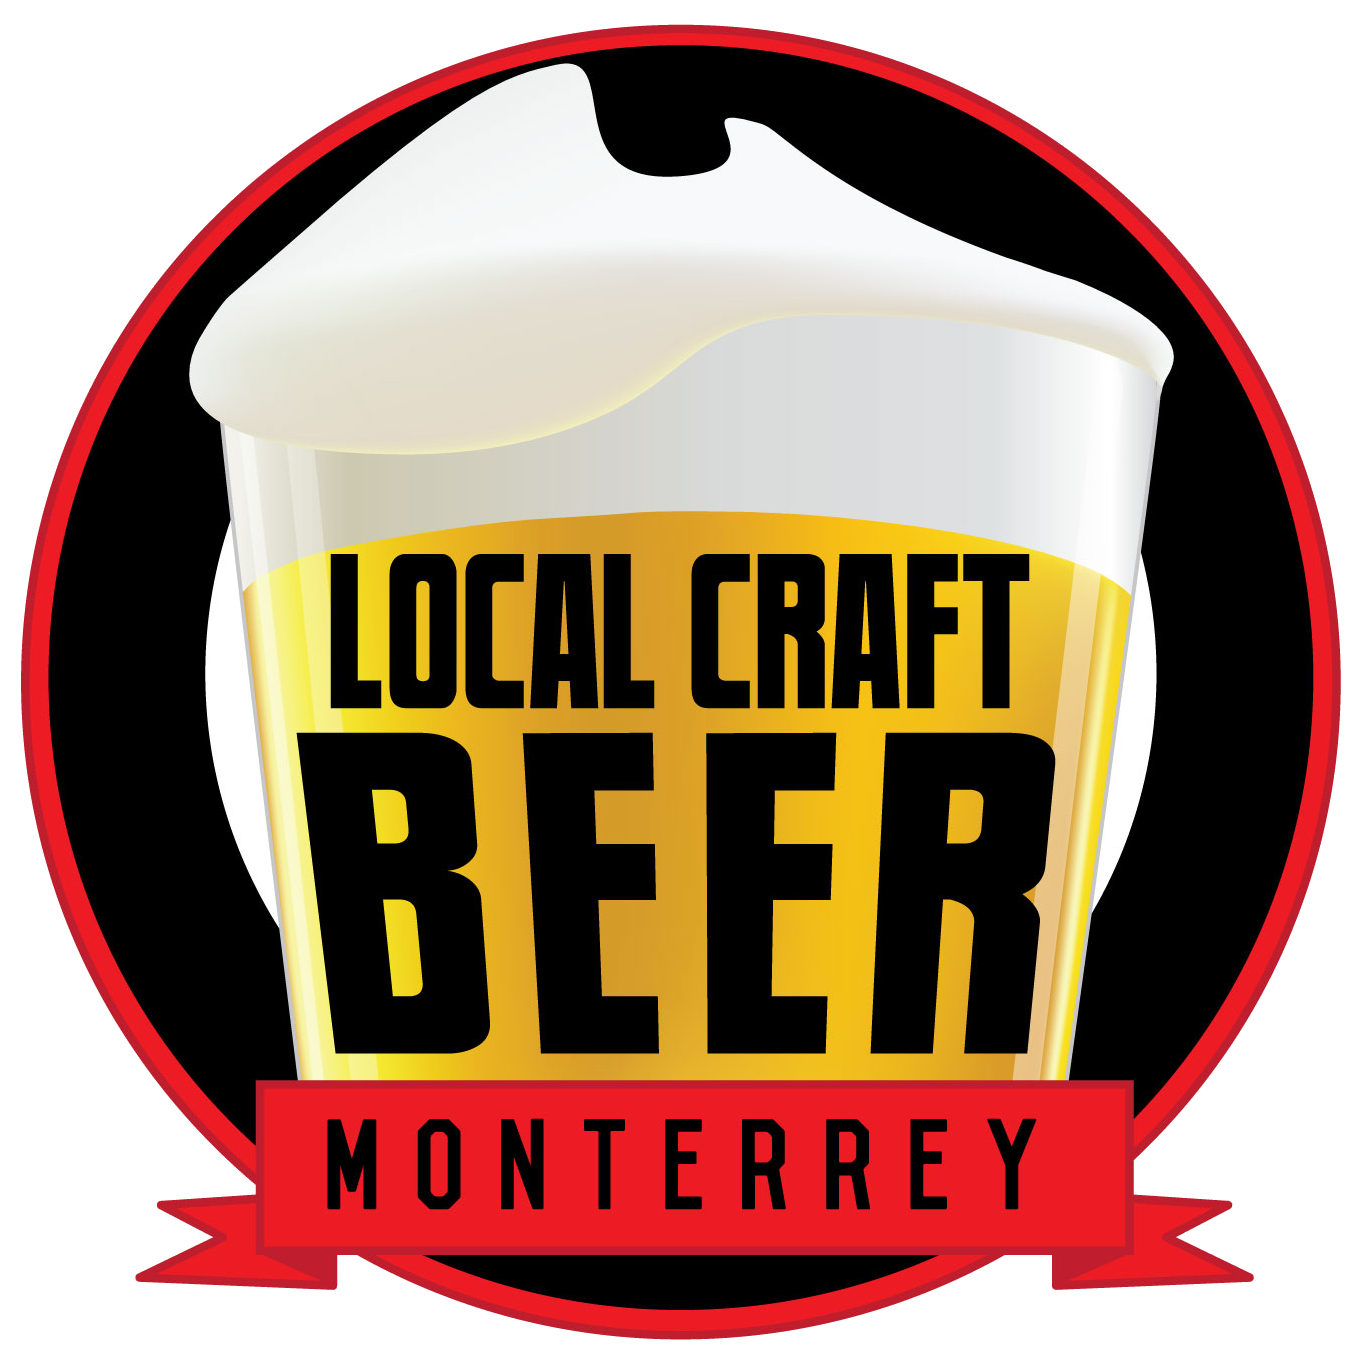 ¡Local Craft Beer!